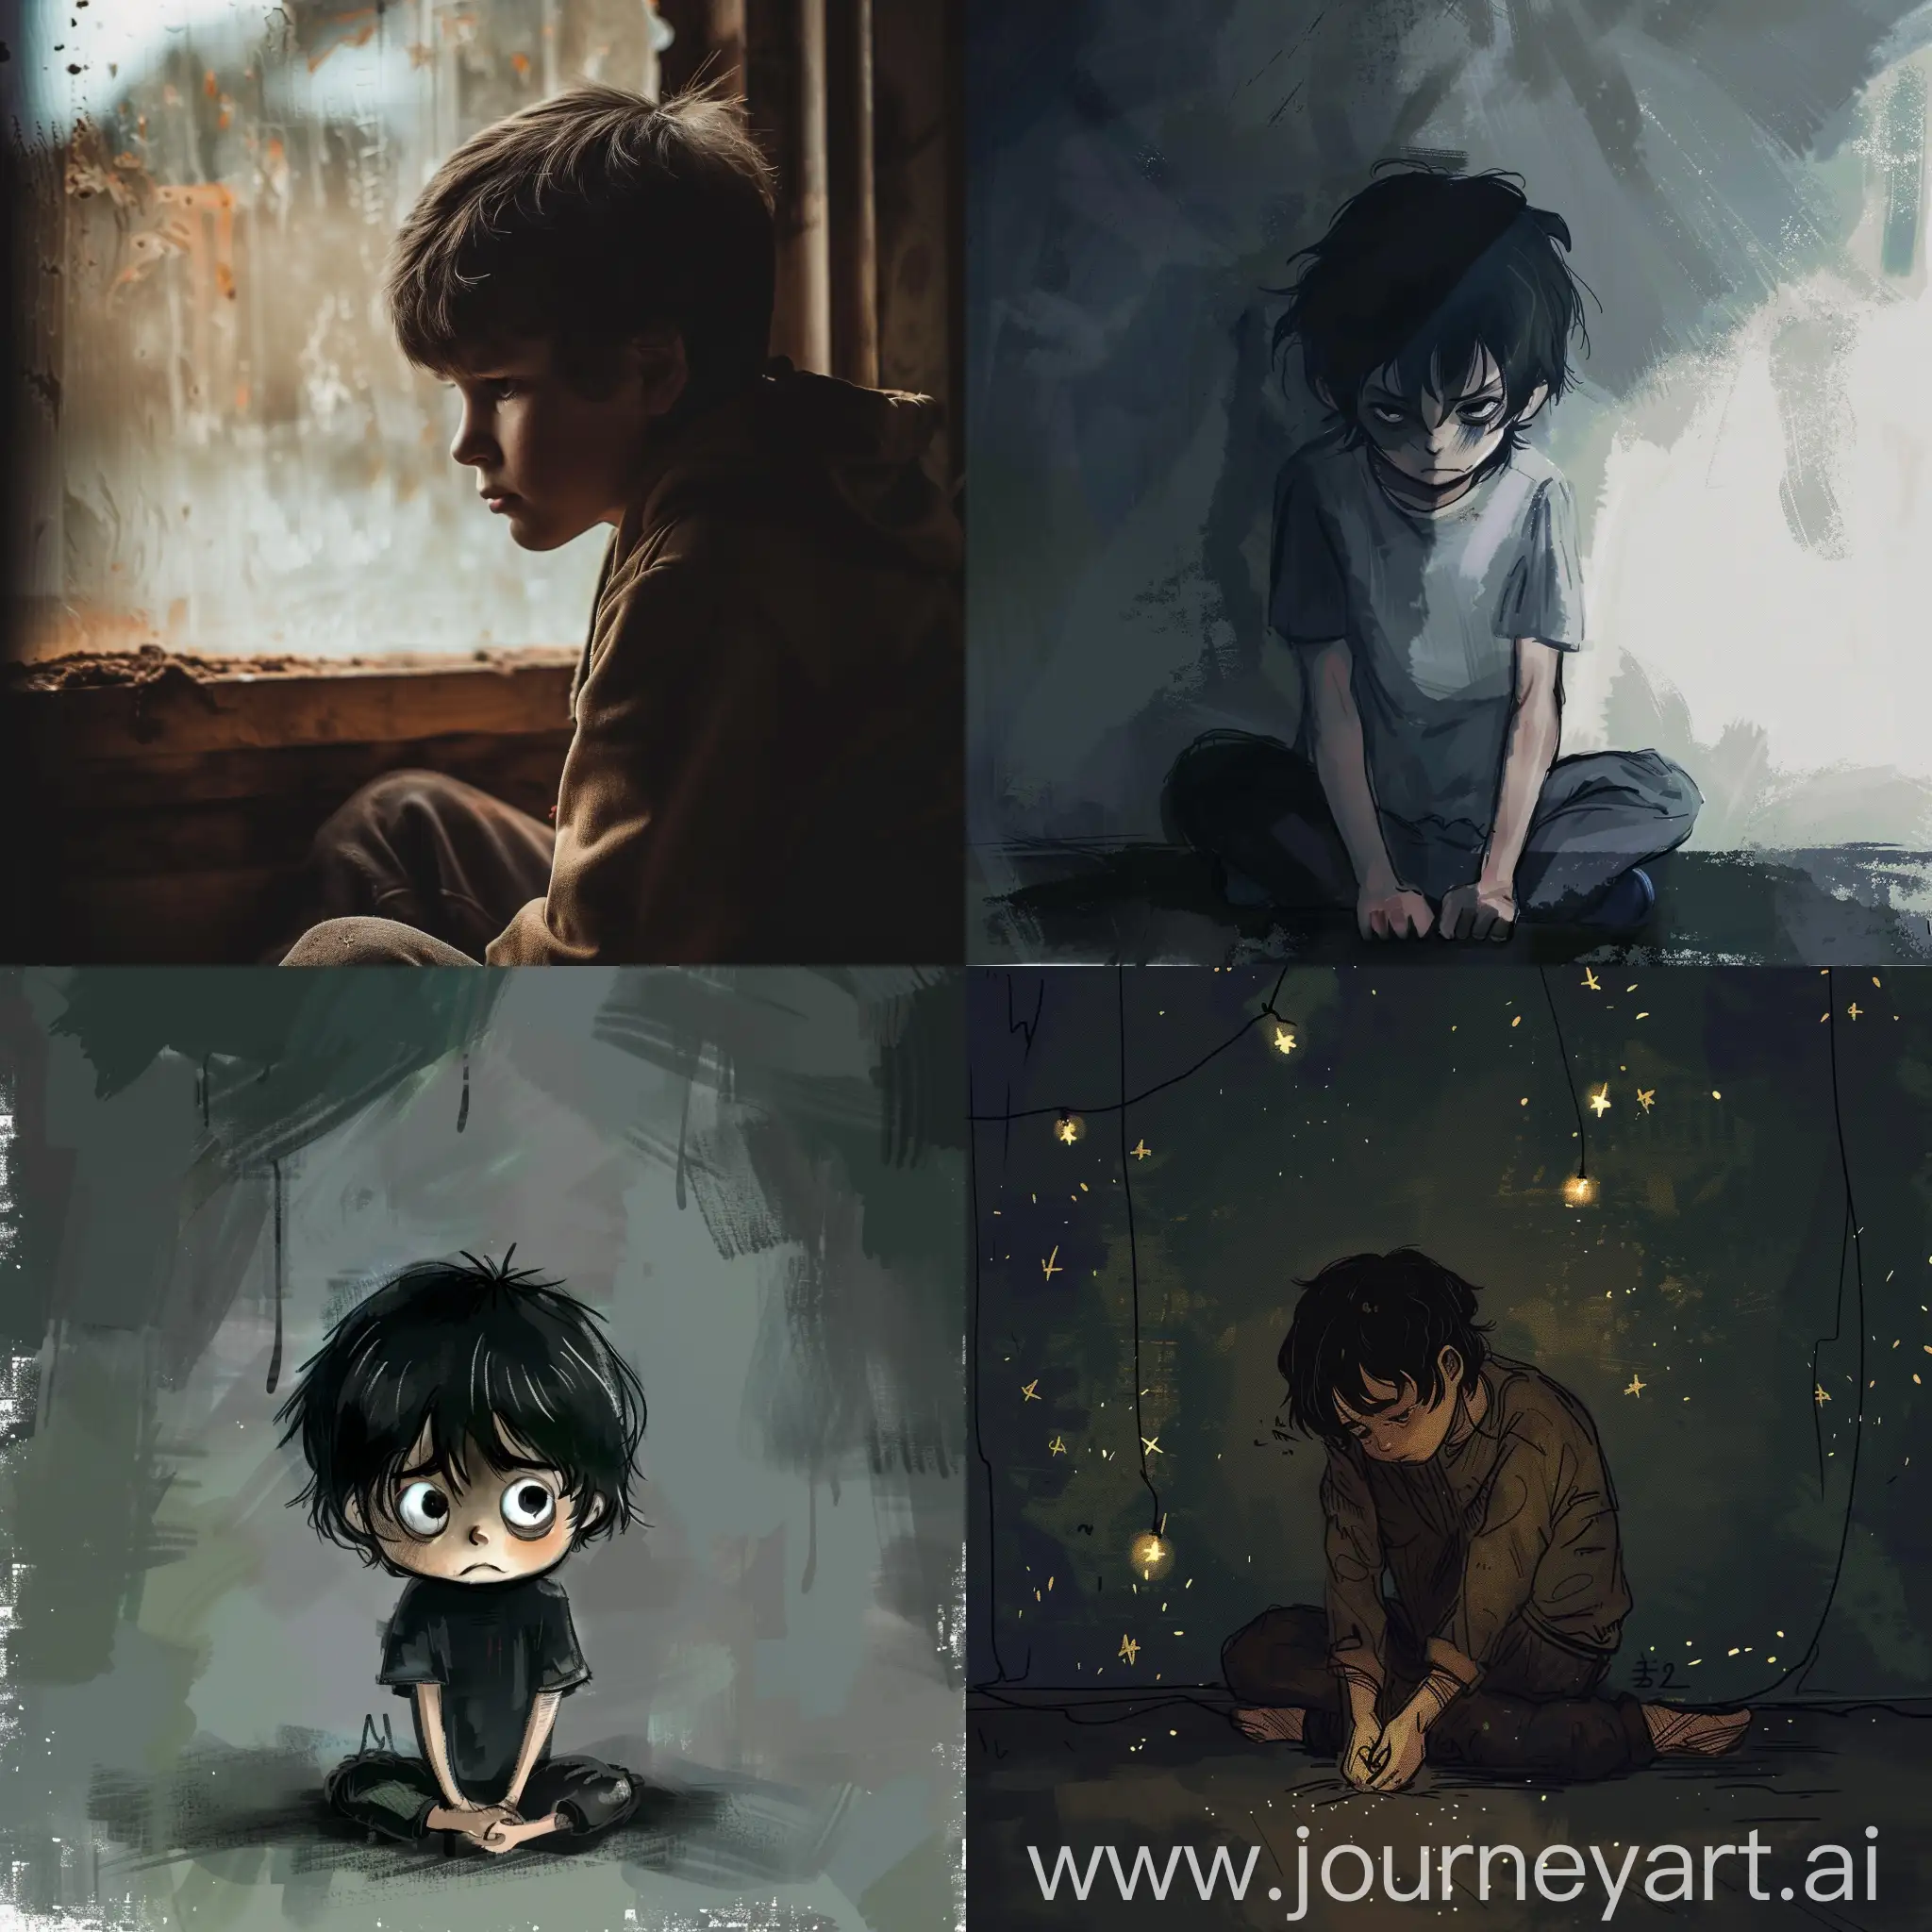 Lonely-Child-Expressing-Depression